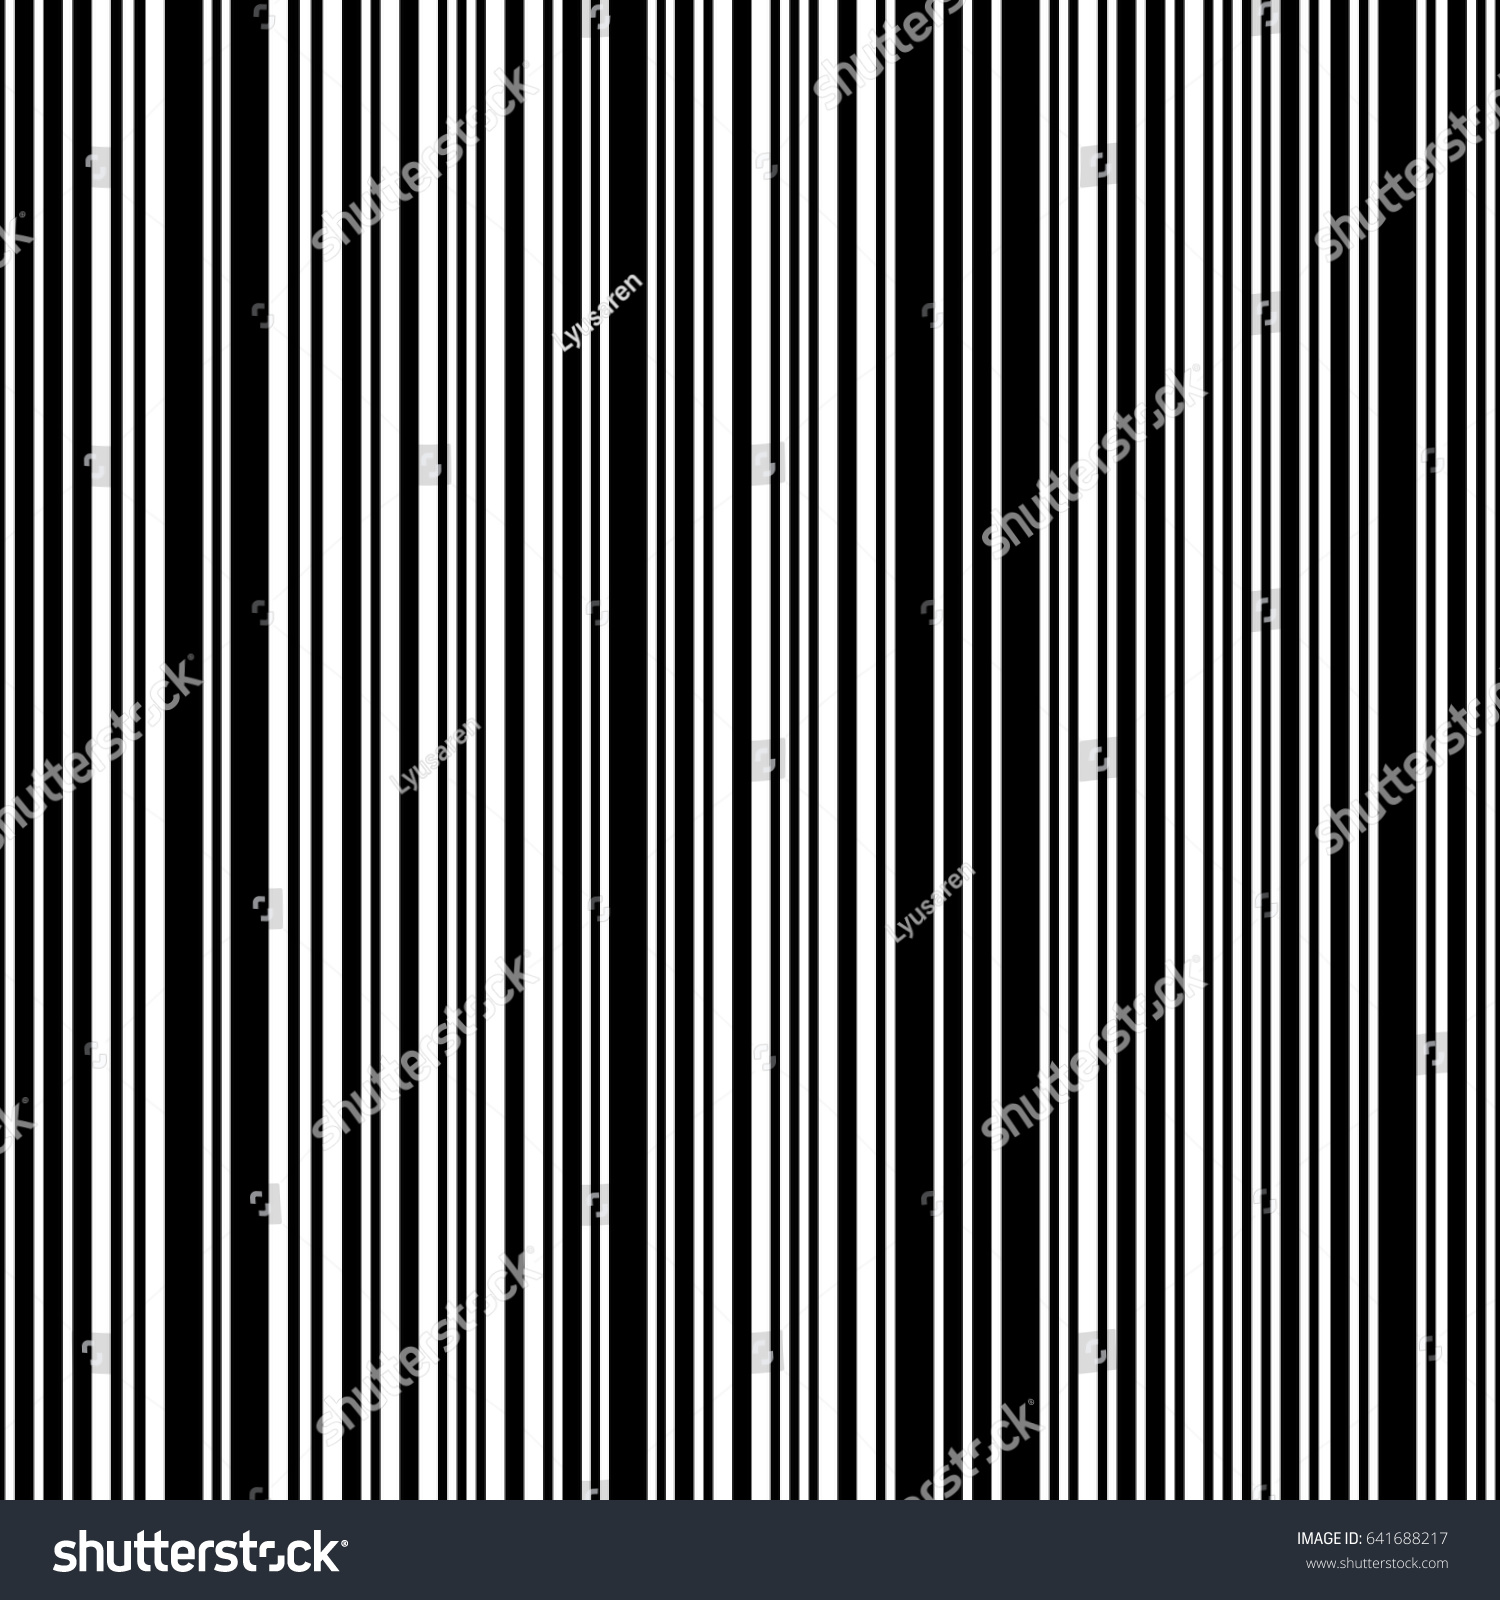 Seamless Barcode Vector Pattern Thin Thick Stock Vector 641688217 ...